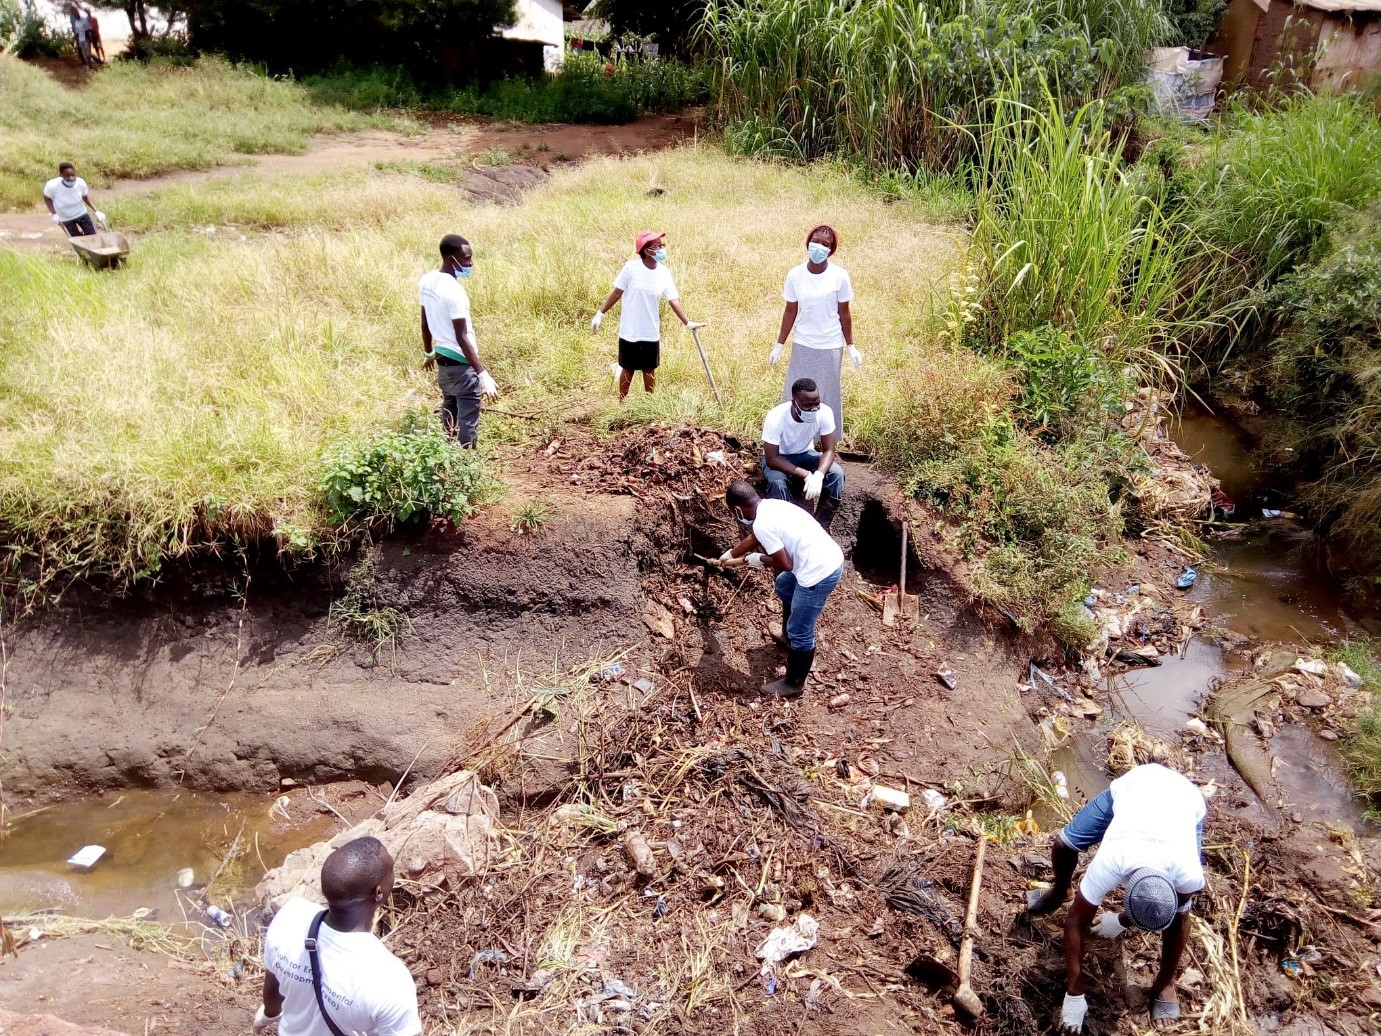 YED members cleaning up a dumpsite in March 2019